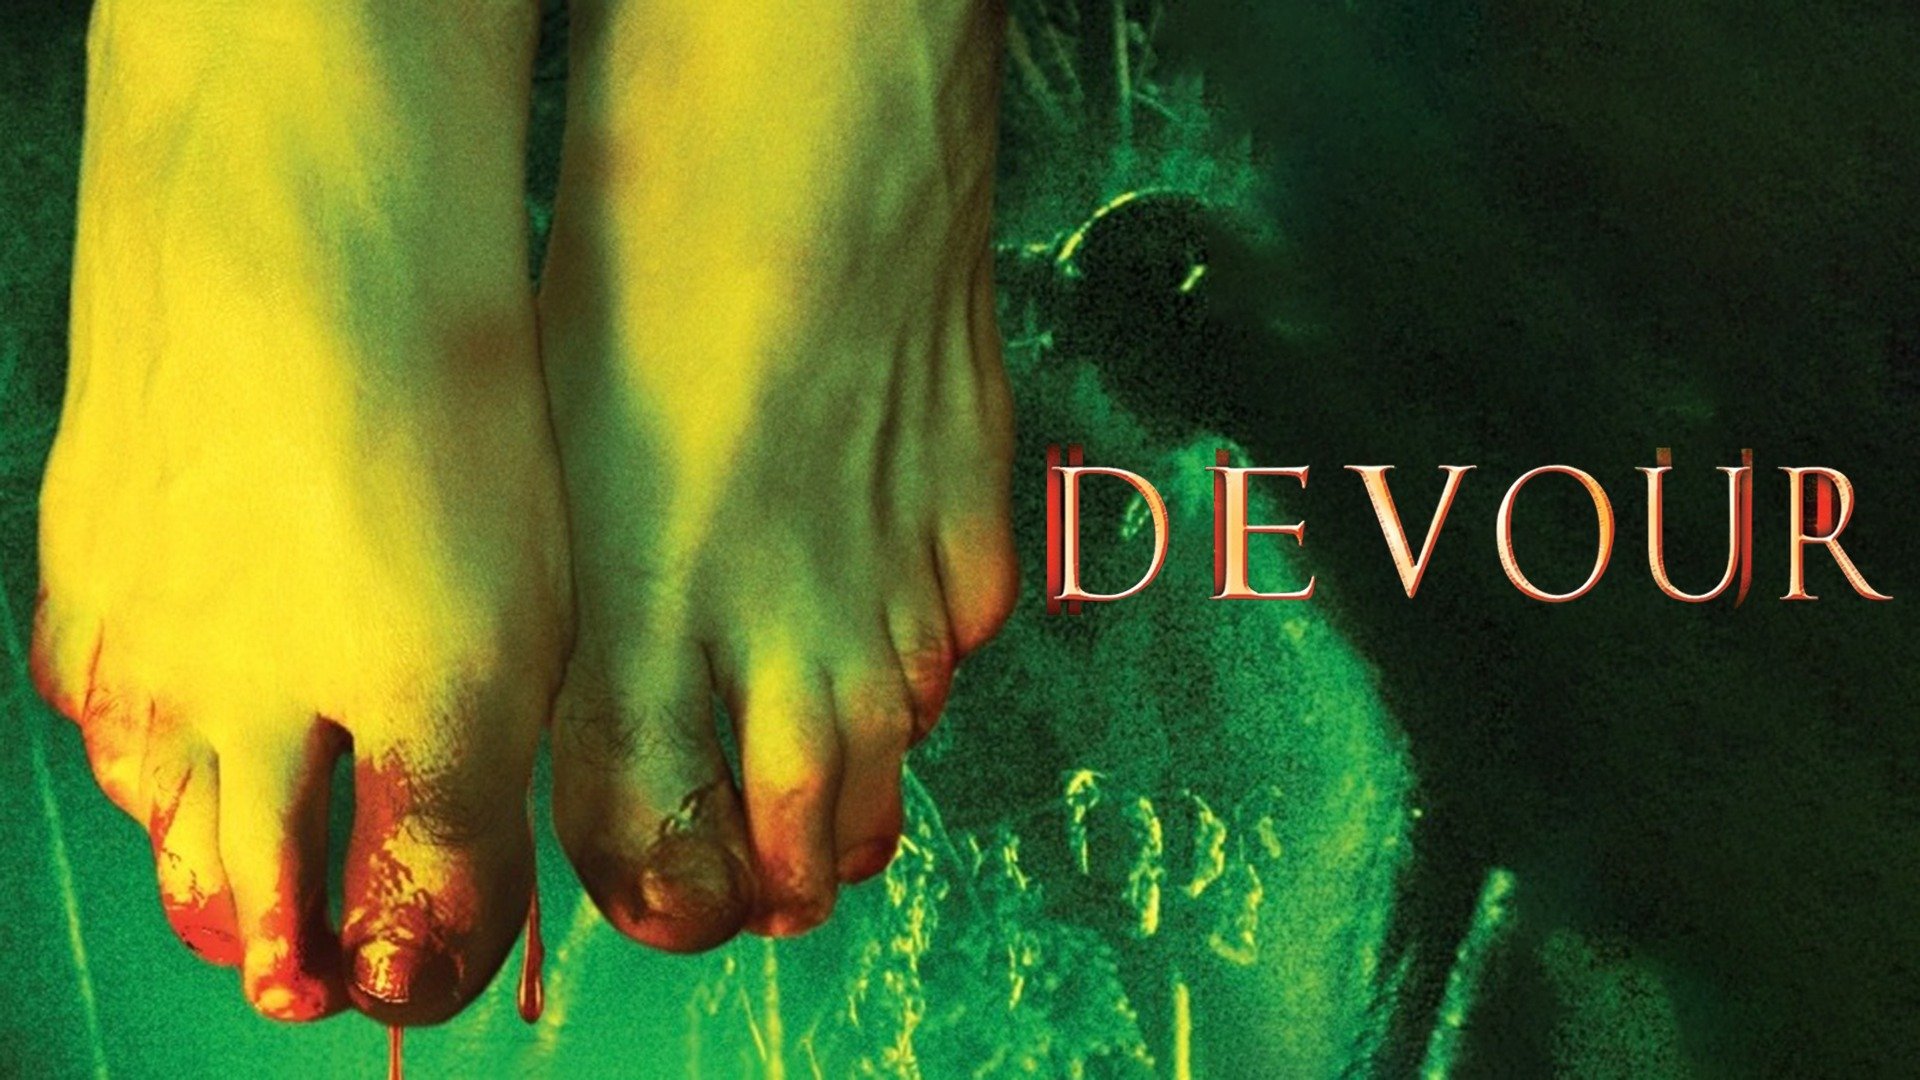 dayse marques recommends watch devour online free pic